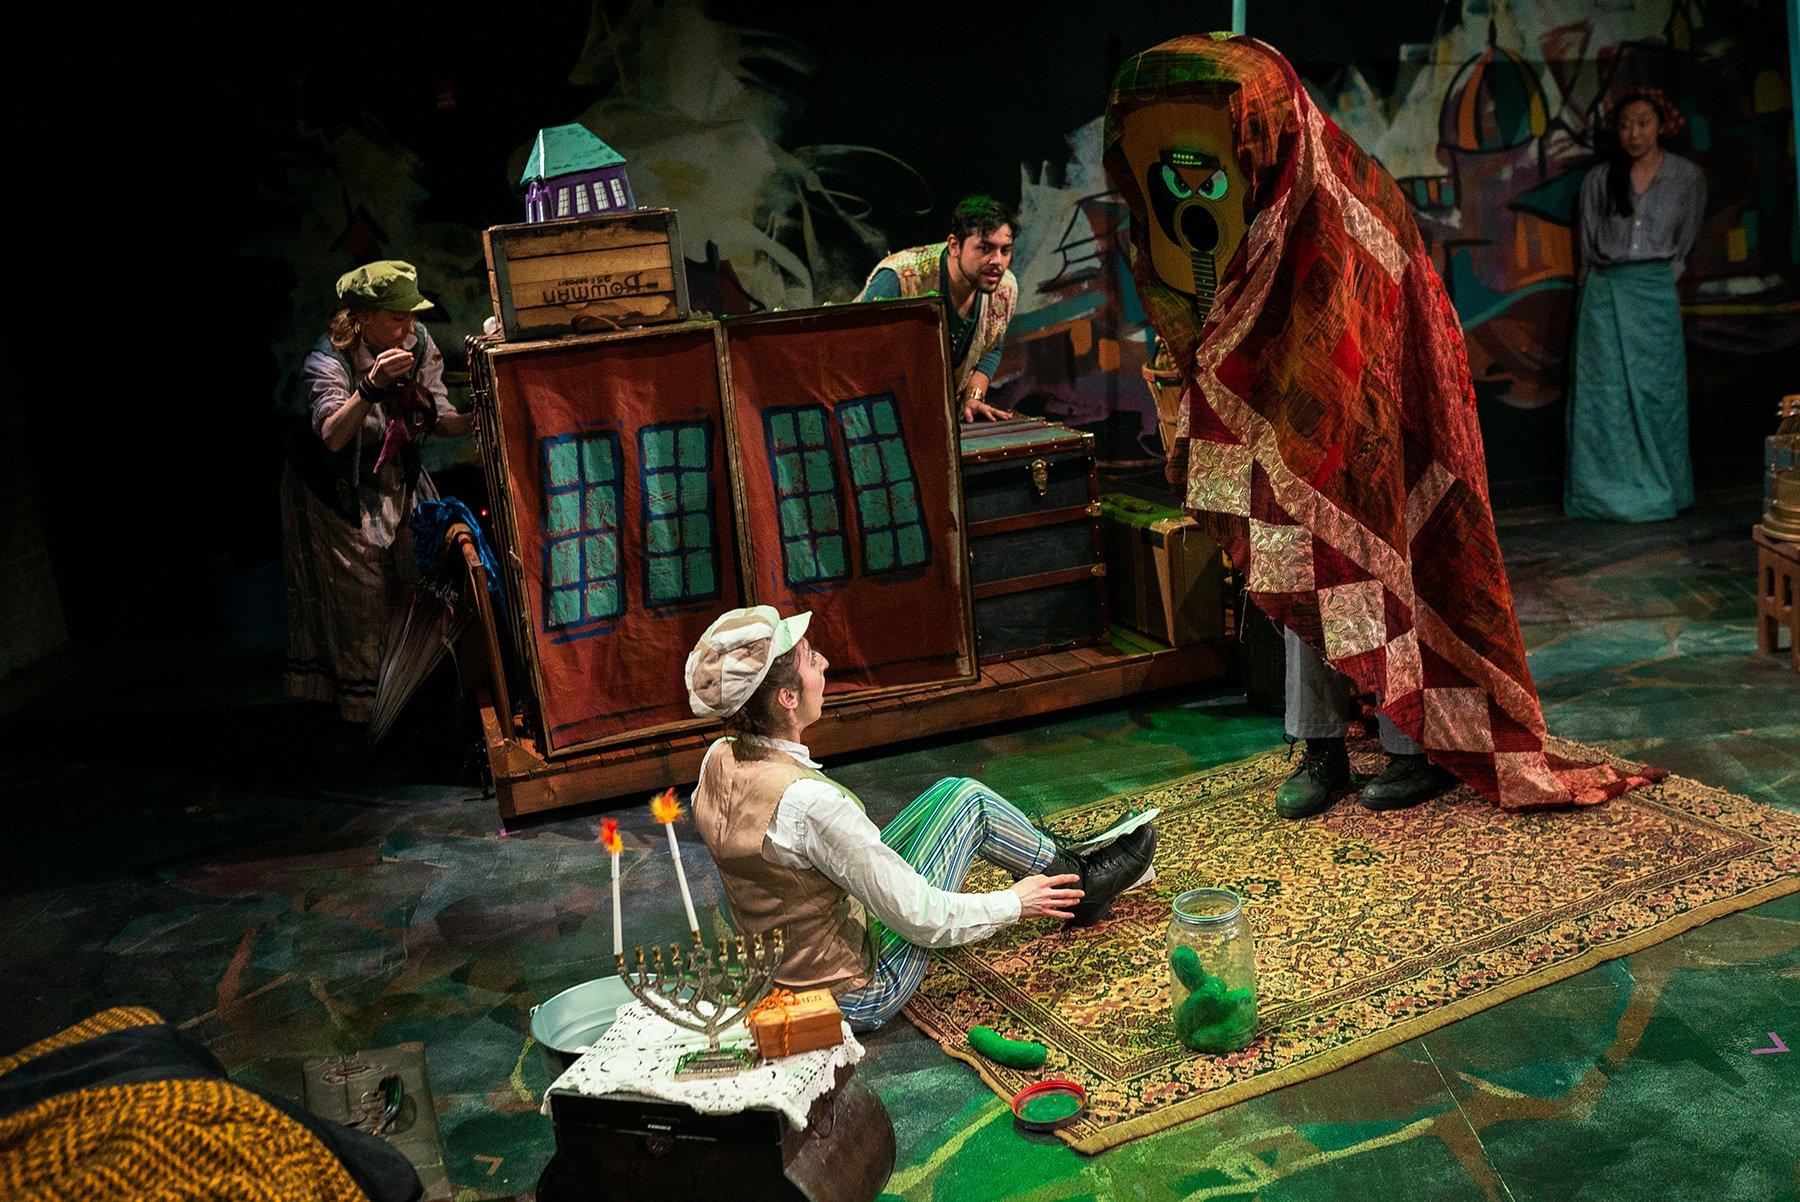 A scene from “Hershel & the Hanukkah Goblins.” (Photo by Jenn Udoni–Franco Images)